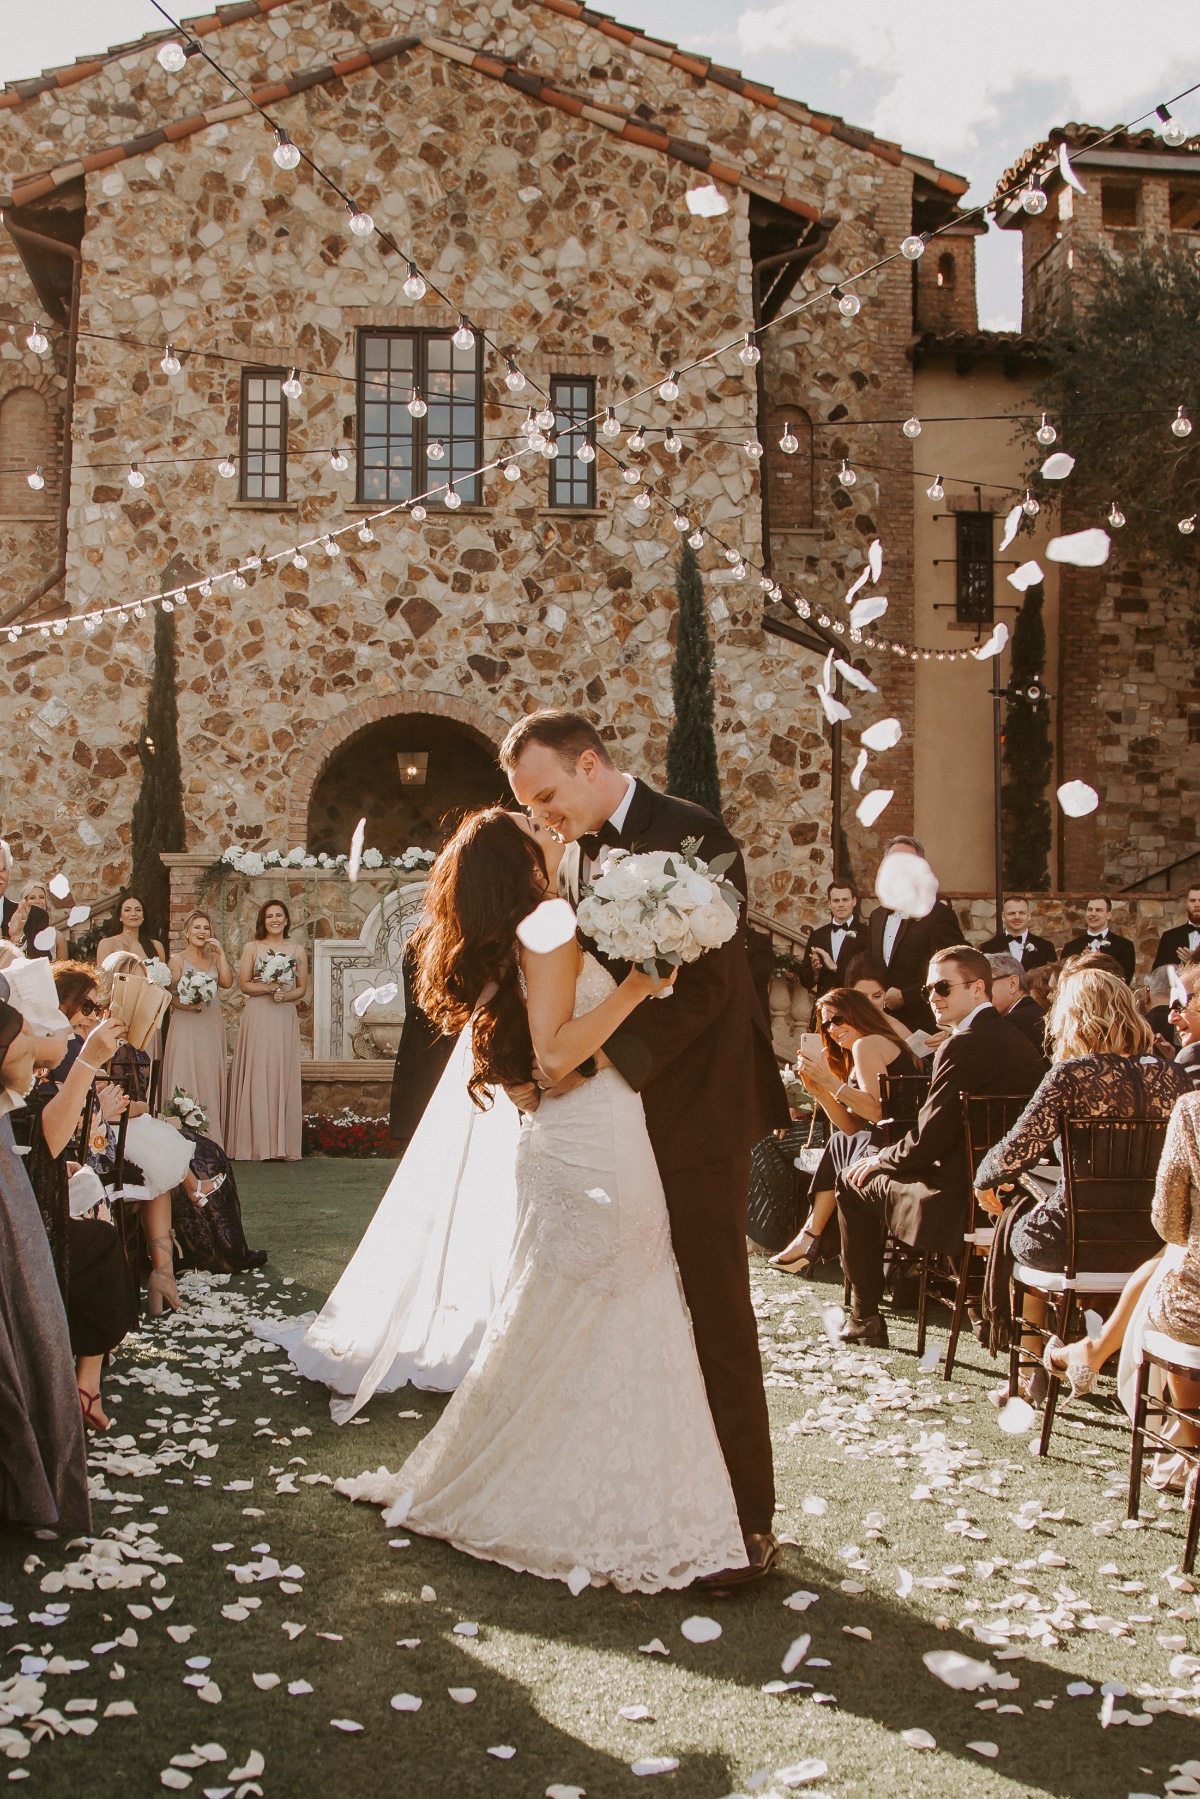 How To Plan A Glam Tuscan Themed Wedding For 50k